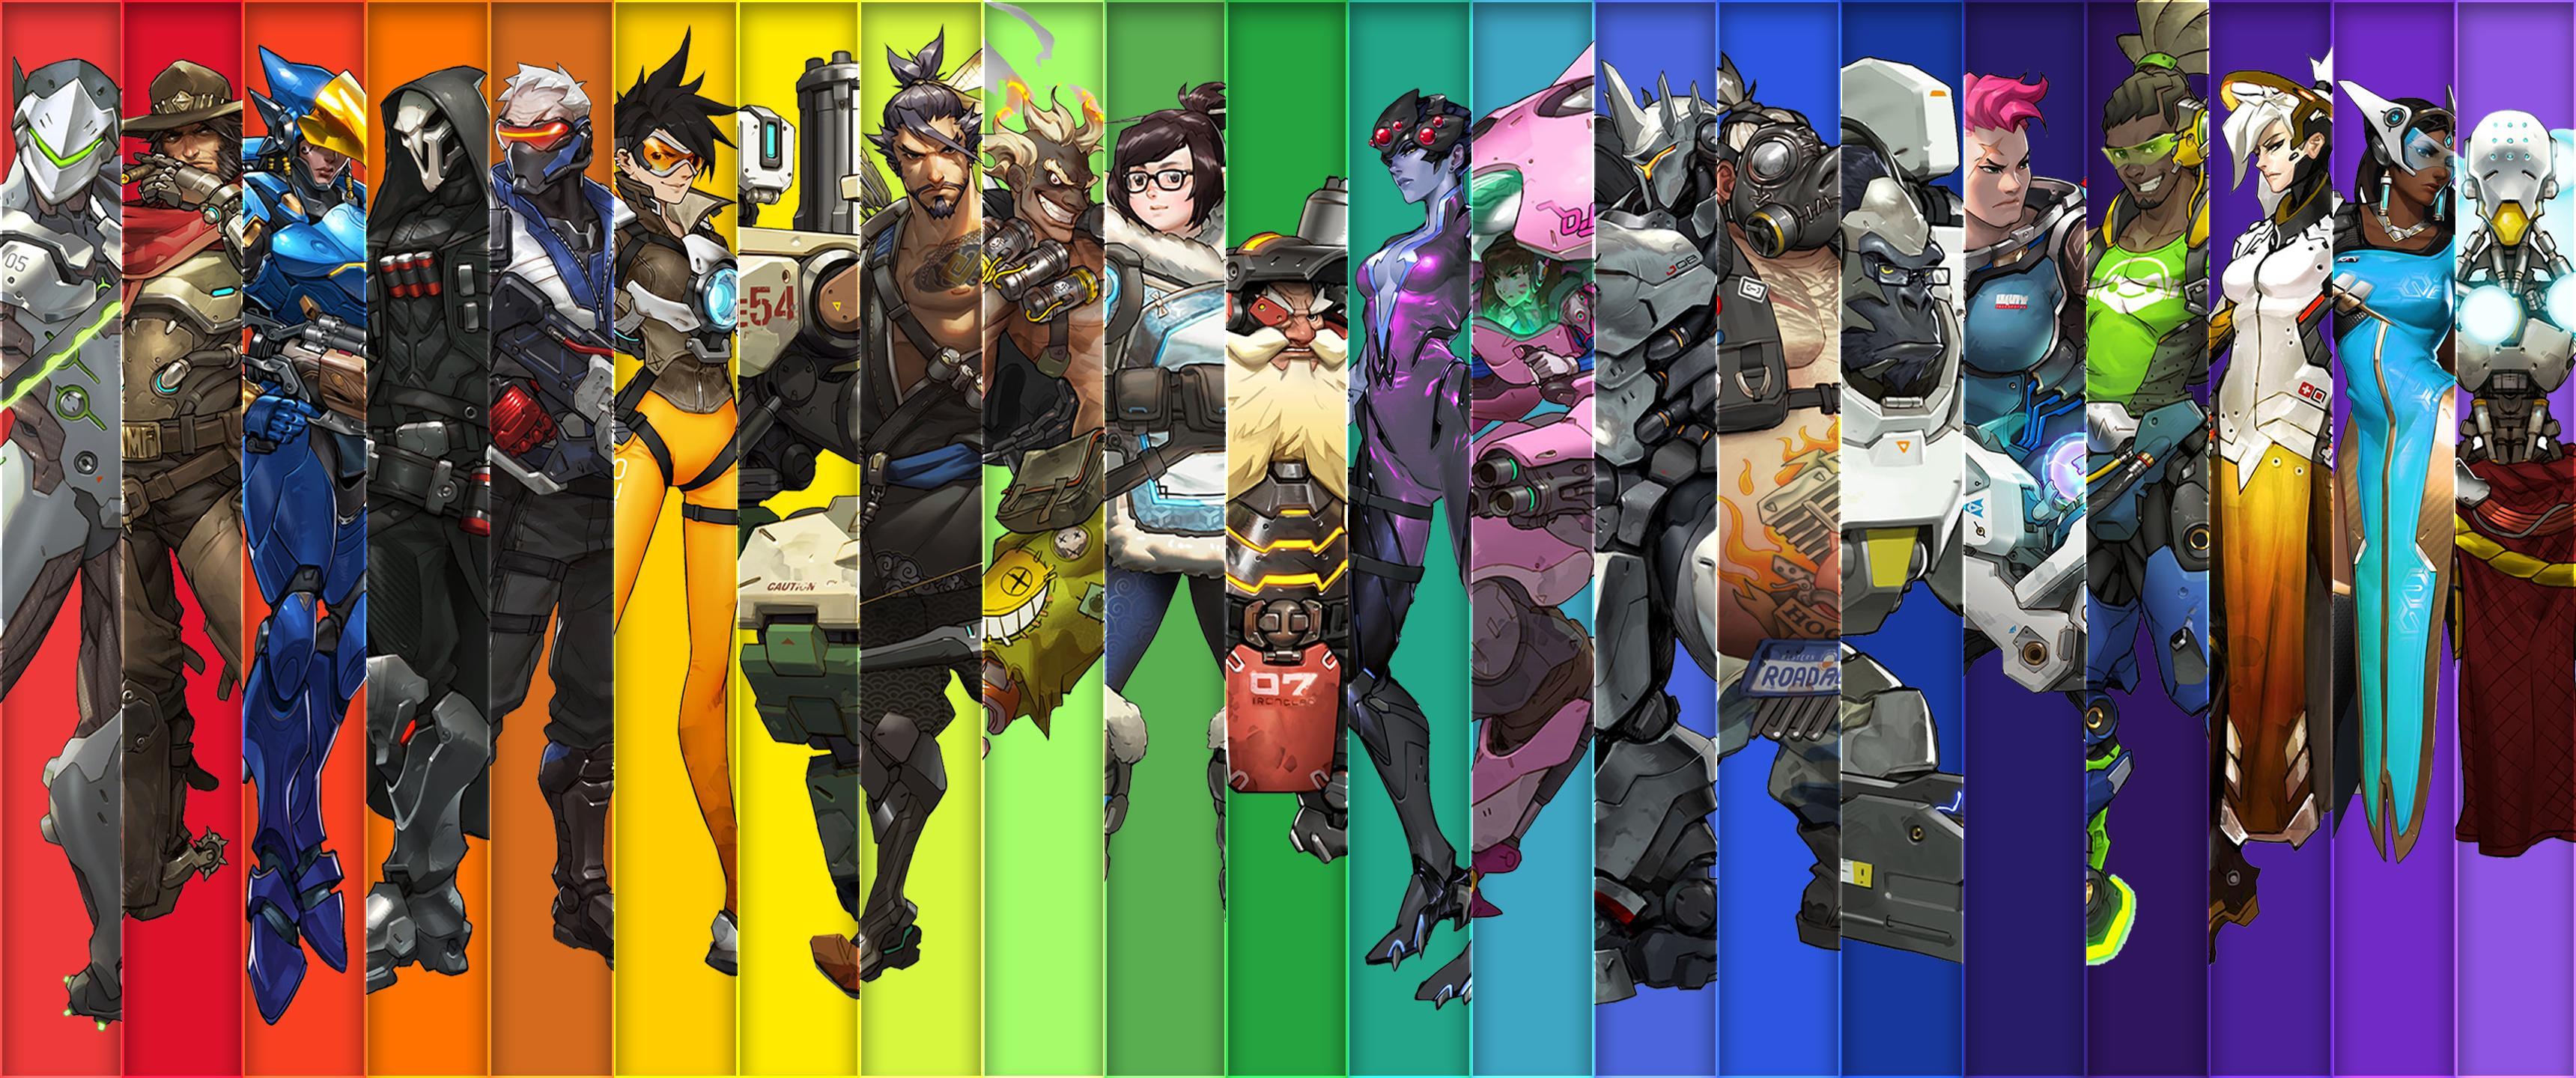 Overwatch 2 wallpapers for desktop download free Overwatch 2 pictures and  backgrounds for PC  moborg